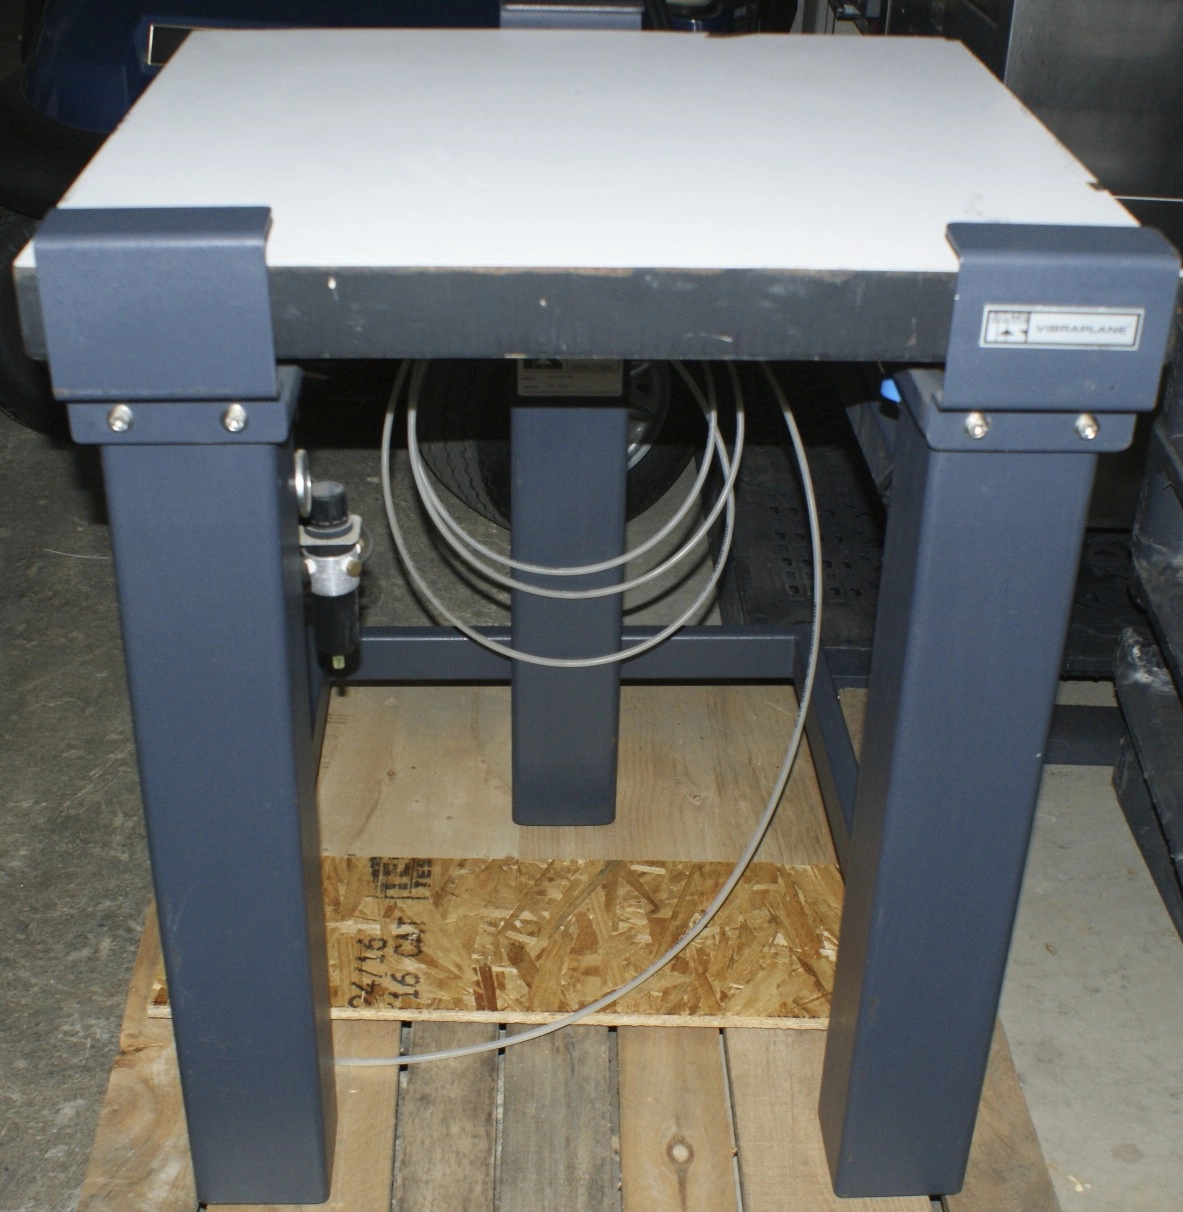 Kinetic Systems 1211-01-00 VIBRAPLANE Kinetic Systems 1211-01-00 MODEL Anti Vibration Table used nice -